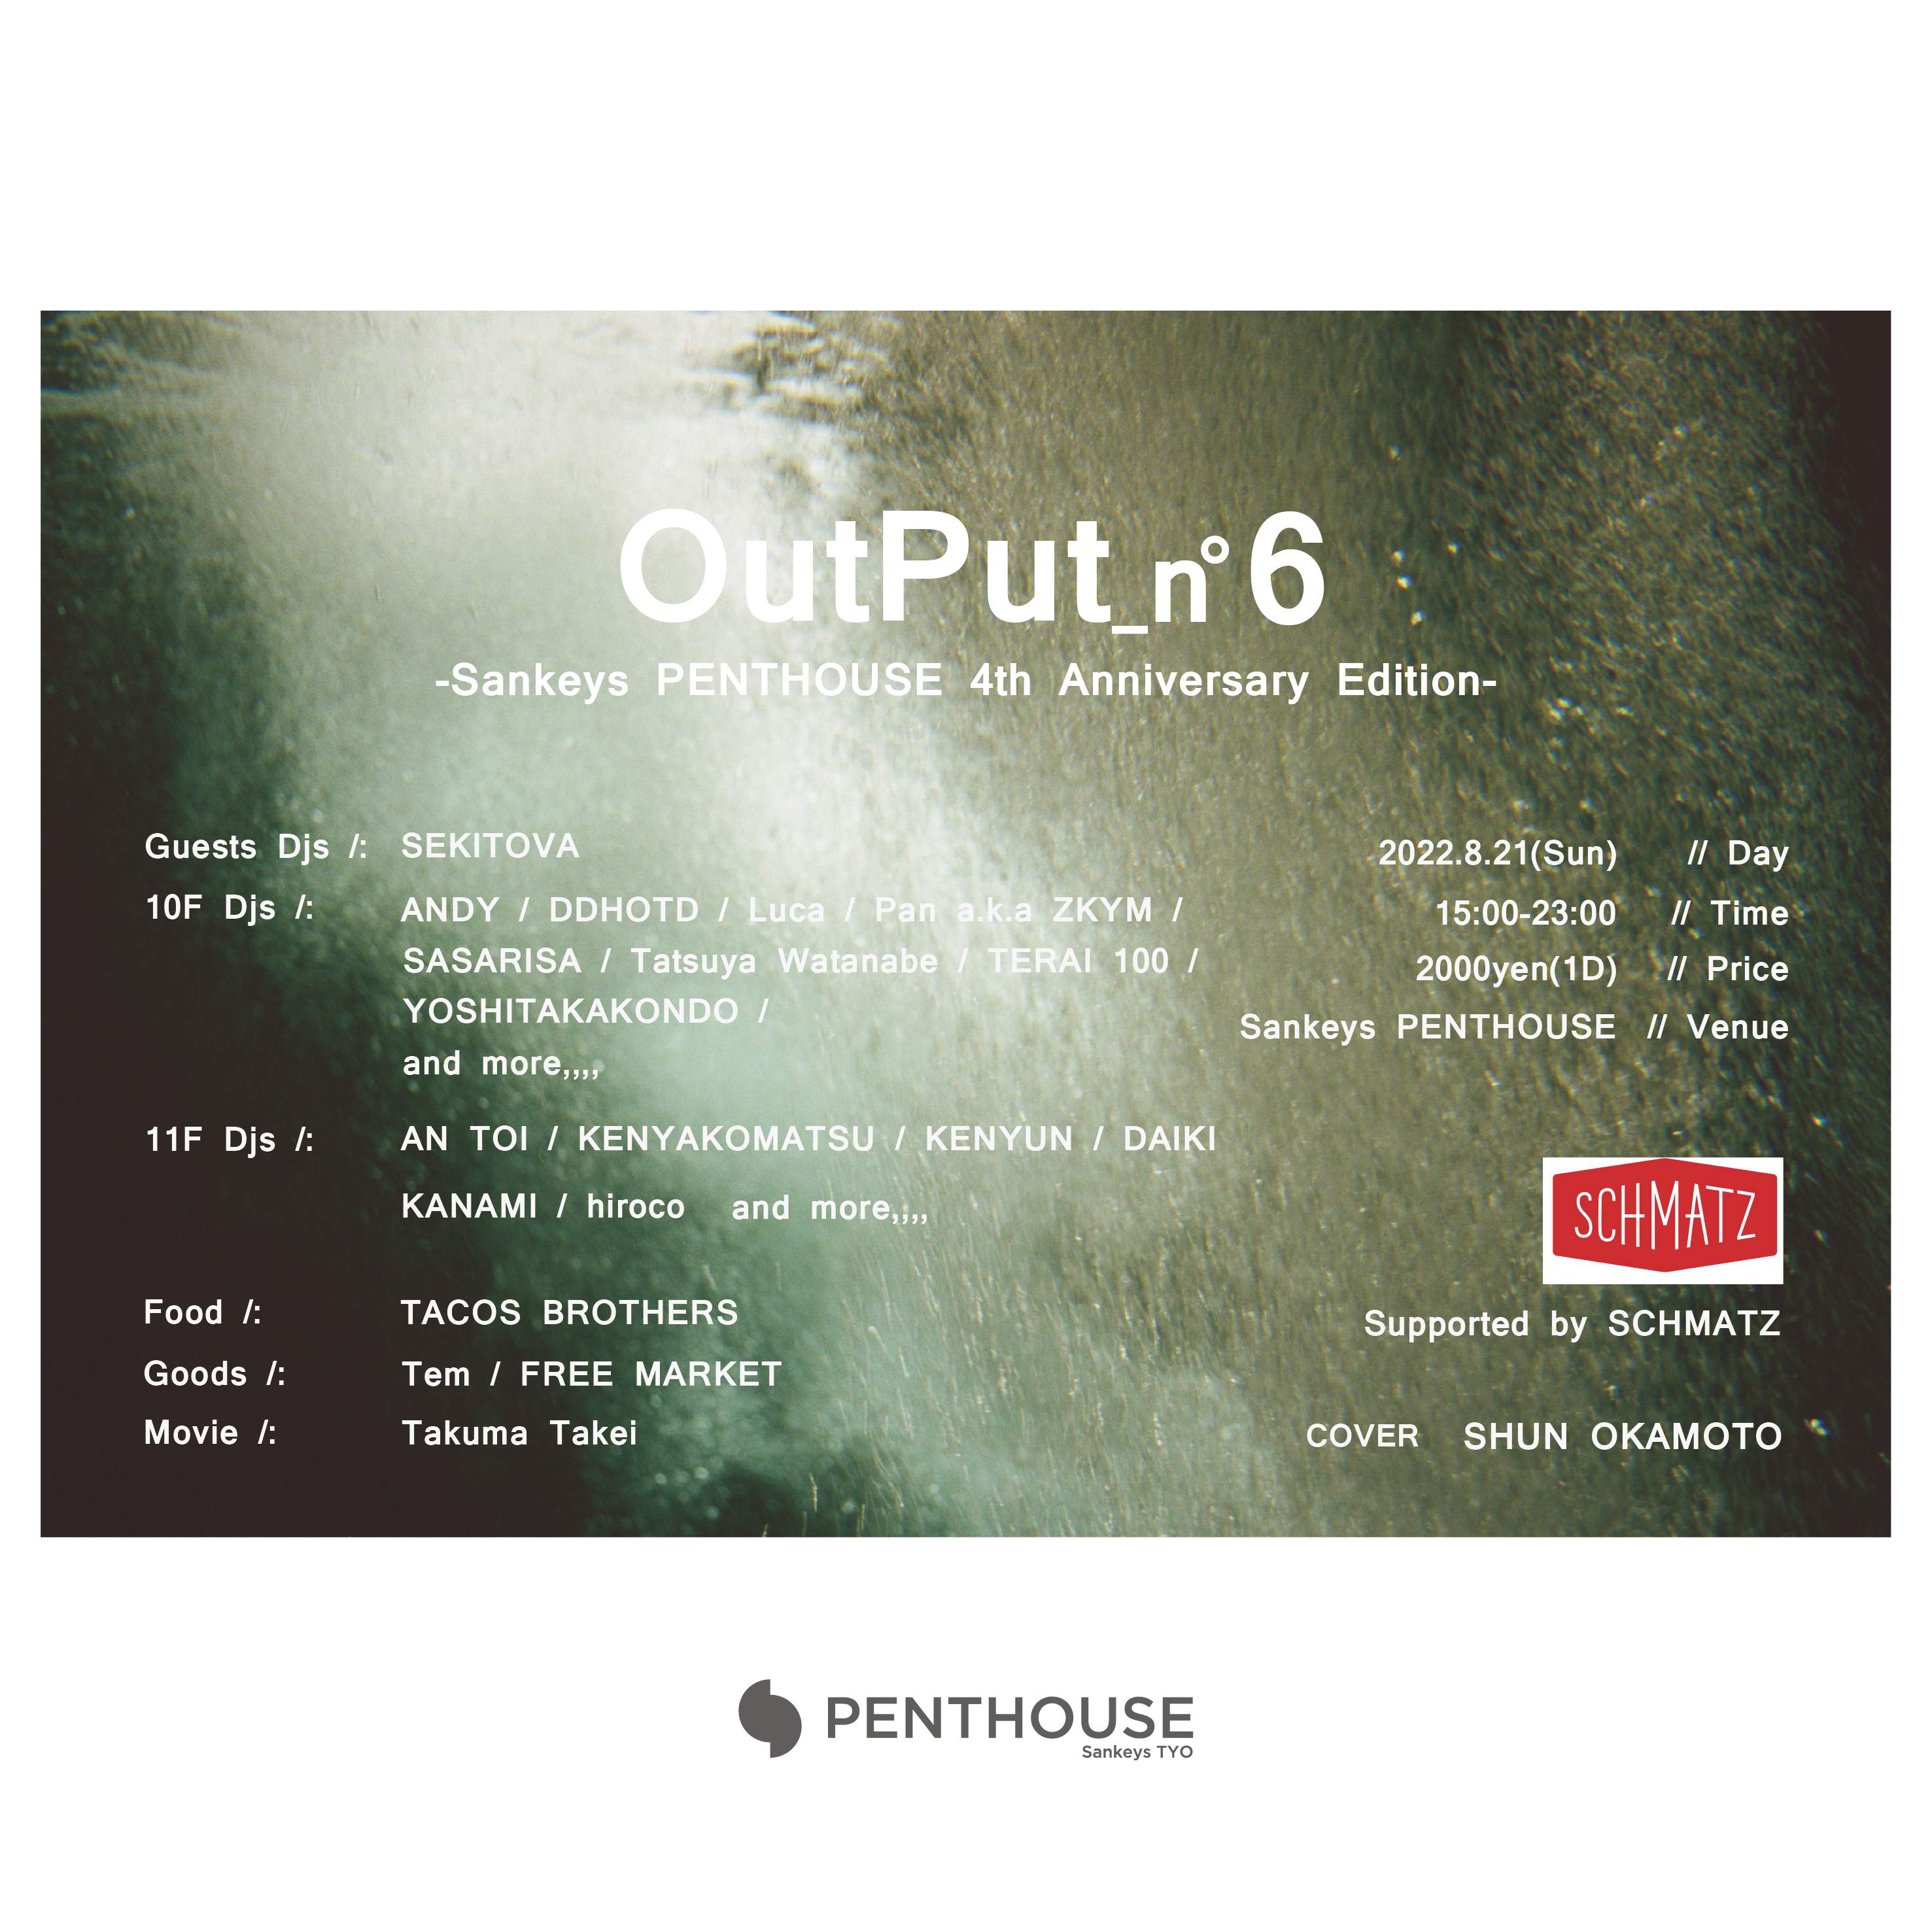 Output_n6 -Sankeys PENTHOUSE 4th Anniversary Edition- - フライヤー表